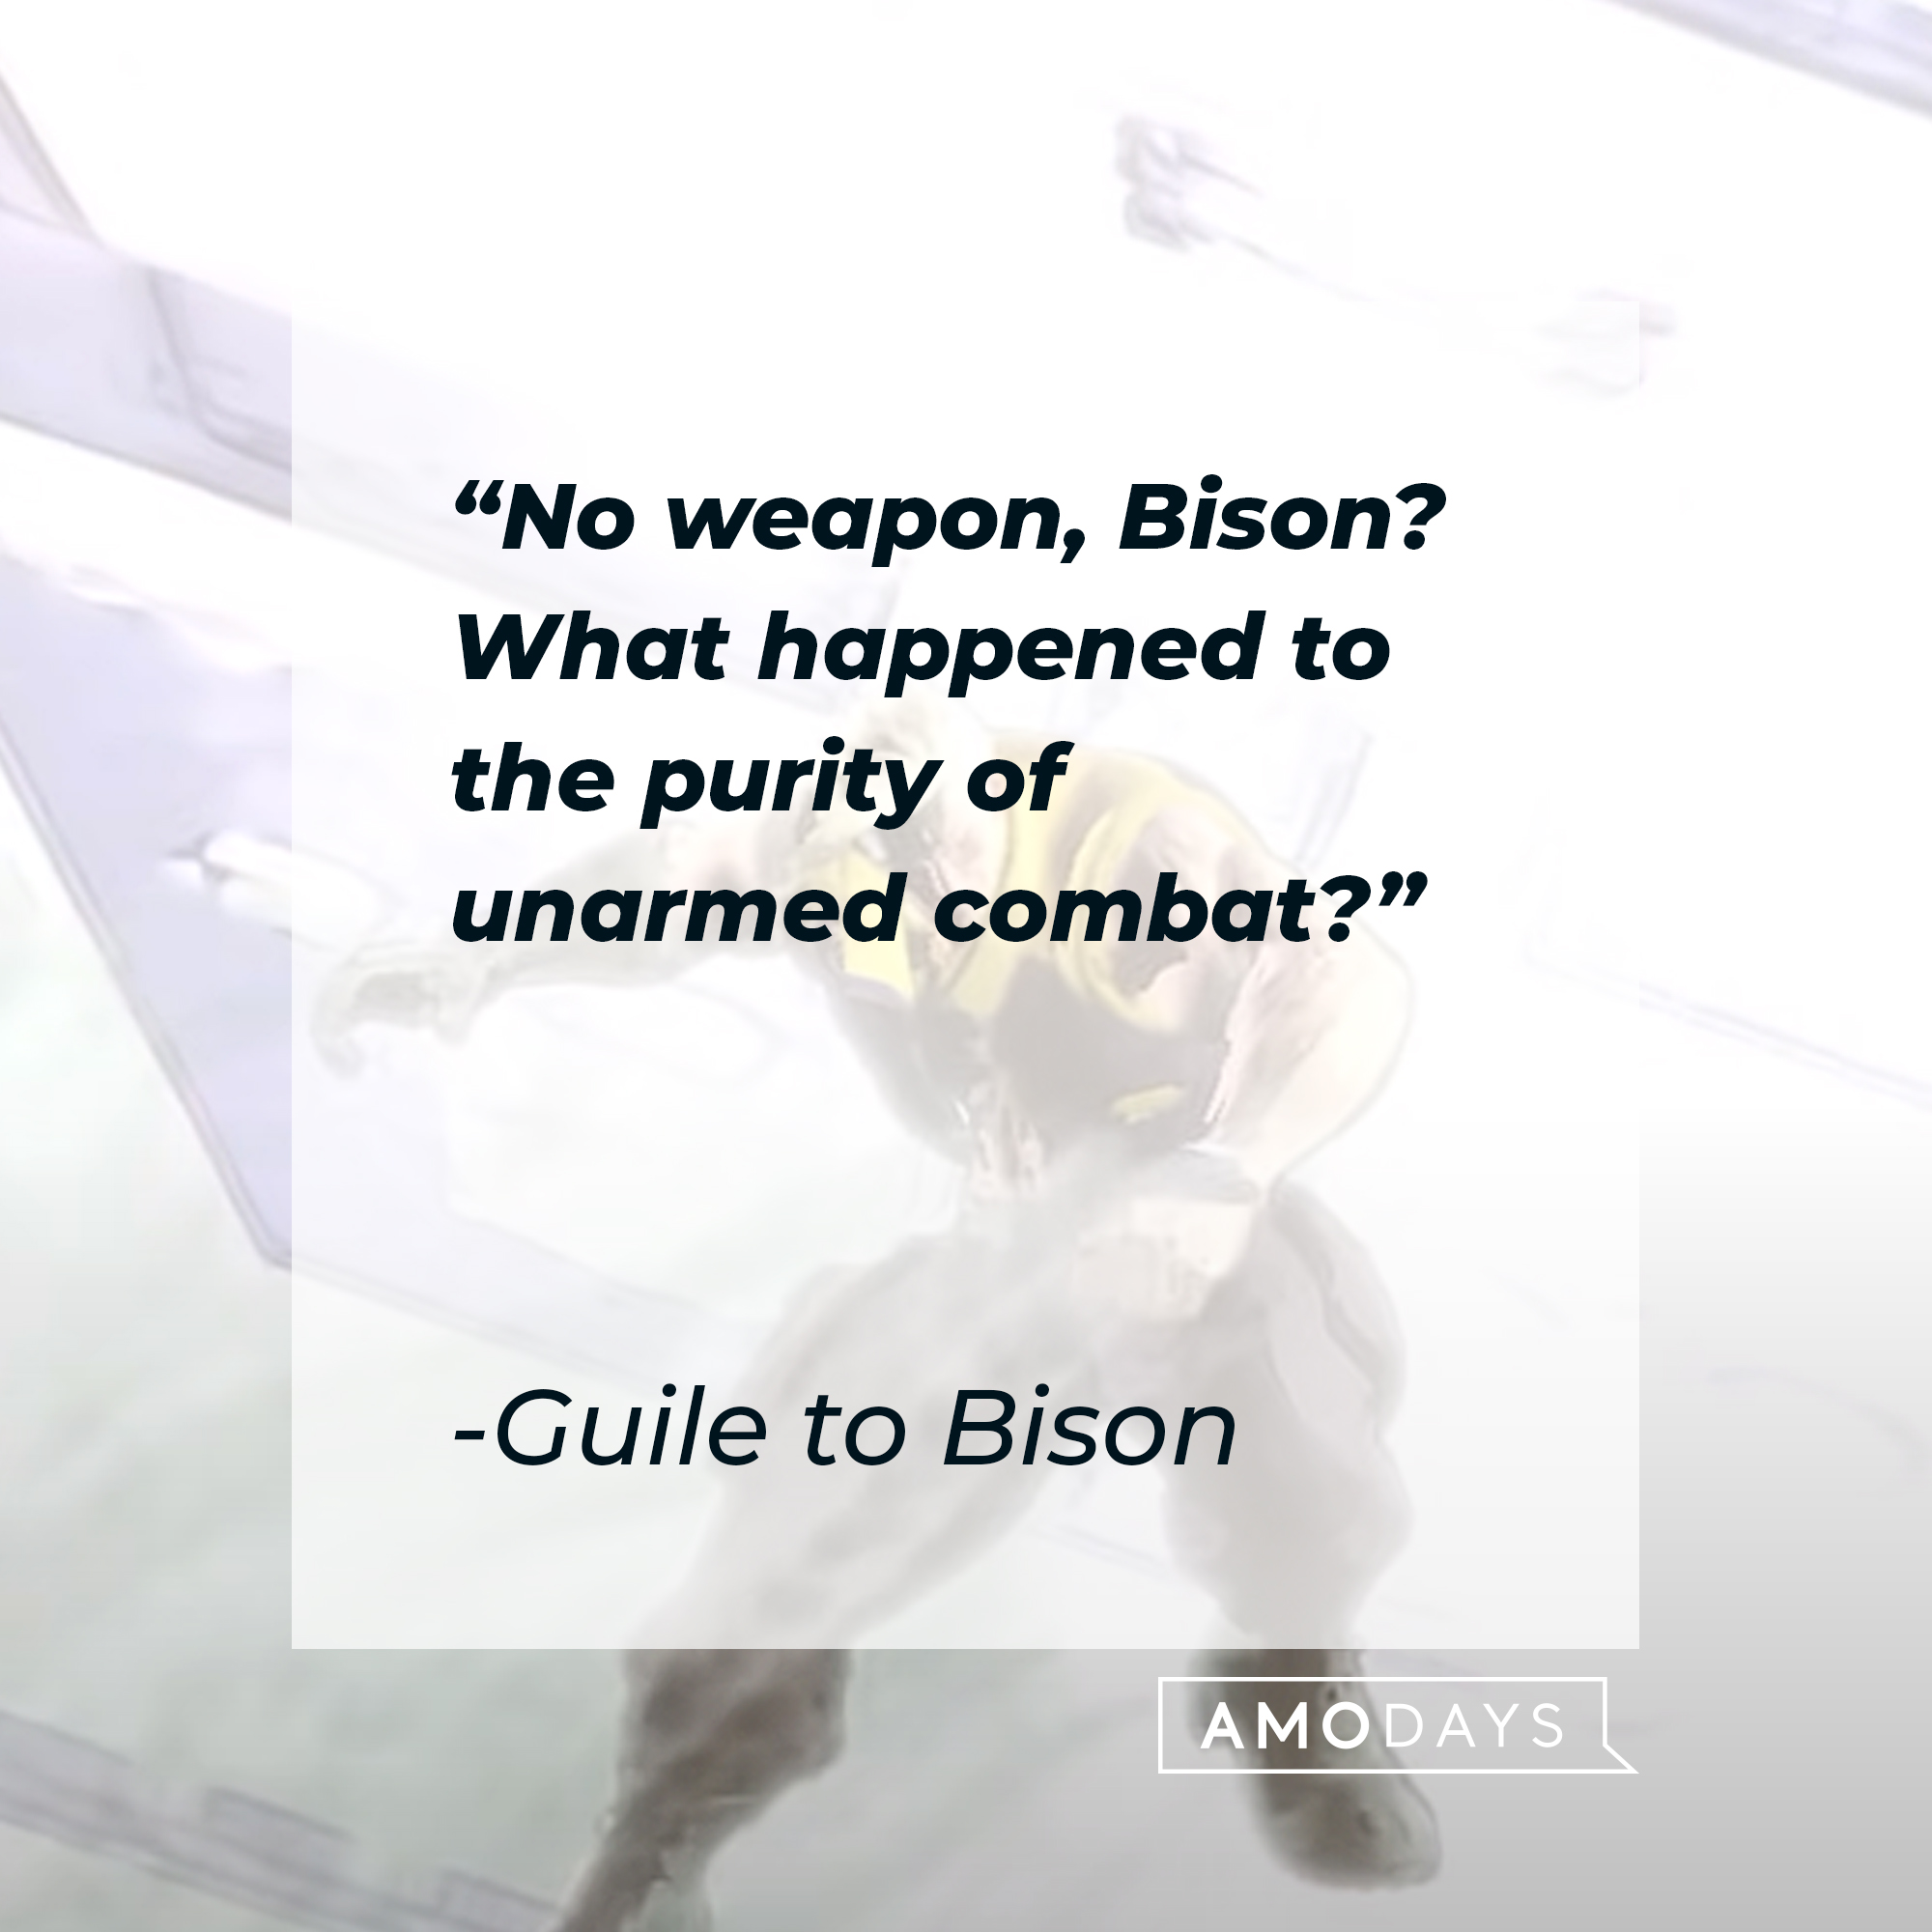 A quote from Guile to Bison: "No weapon, Bison? What happened to the purity of unarmed combat?" | Source: youtube.com/PlayStation